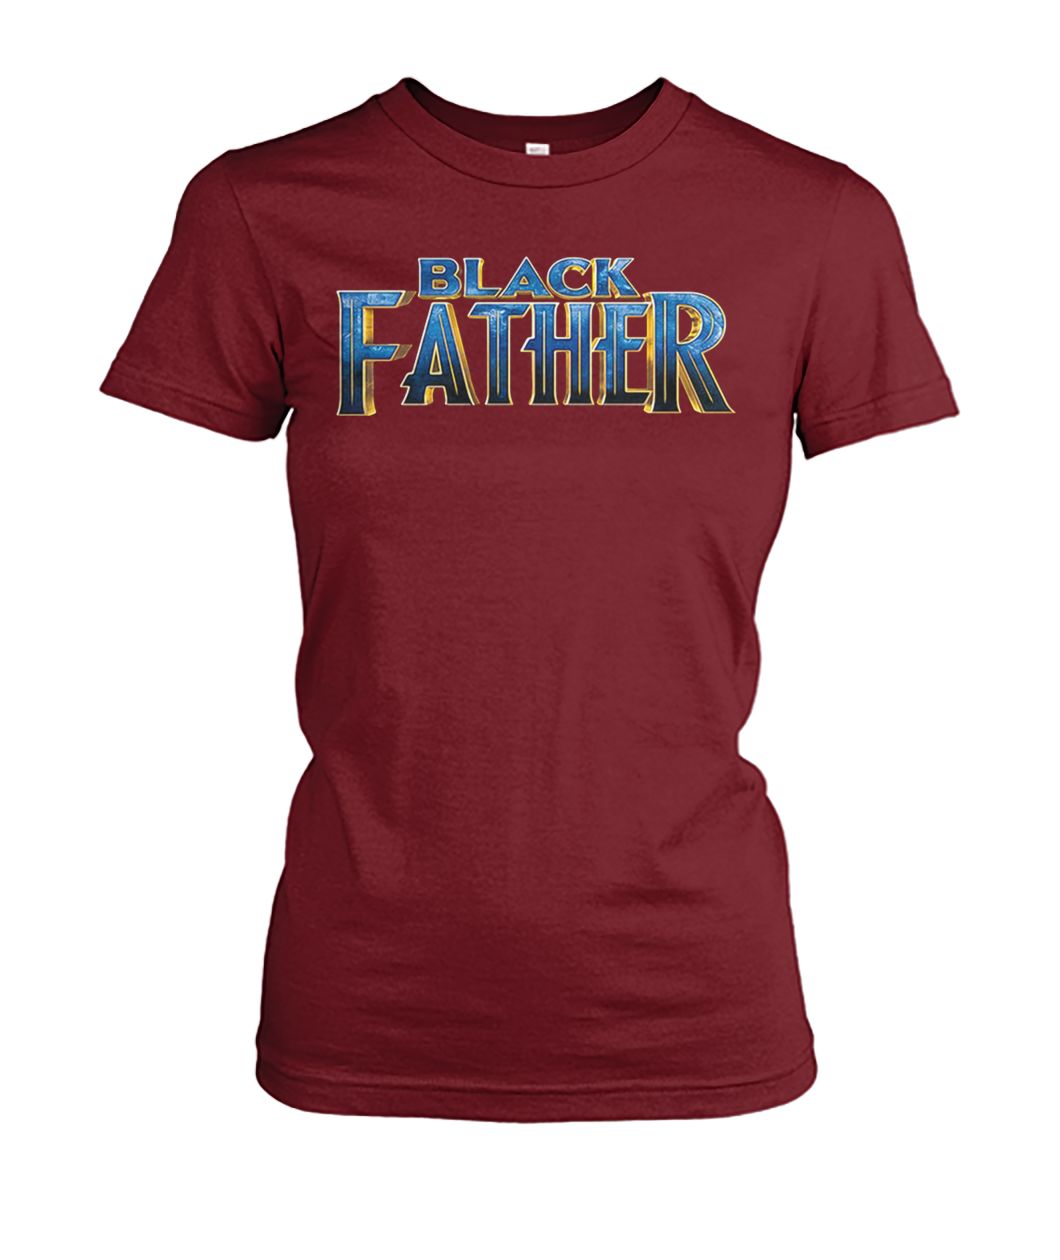 Marvel black panther black father women's crew tee